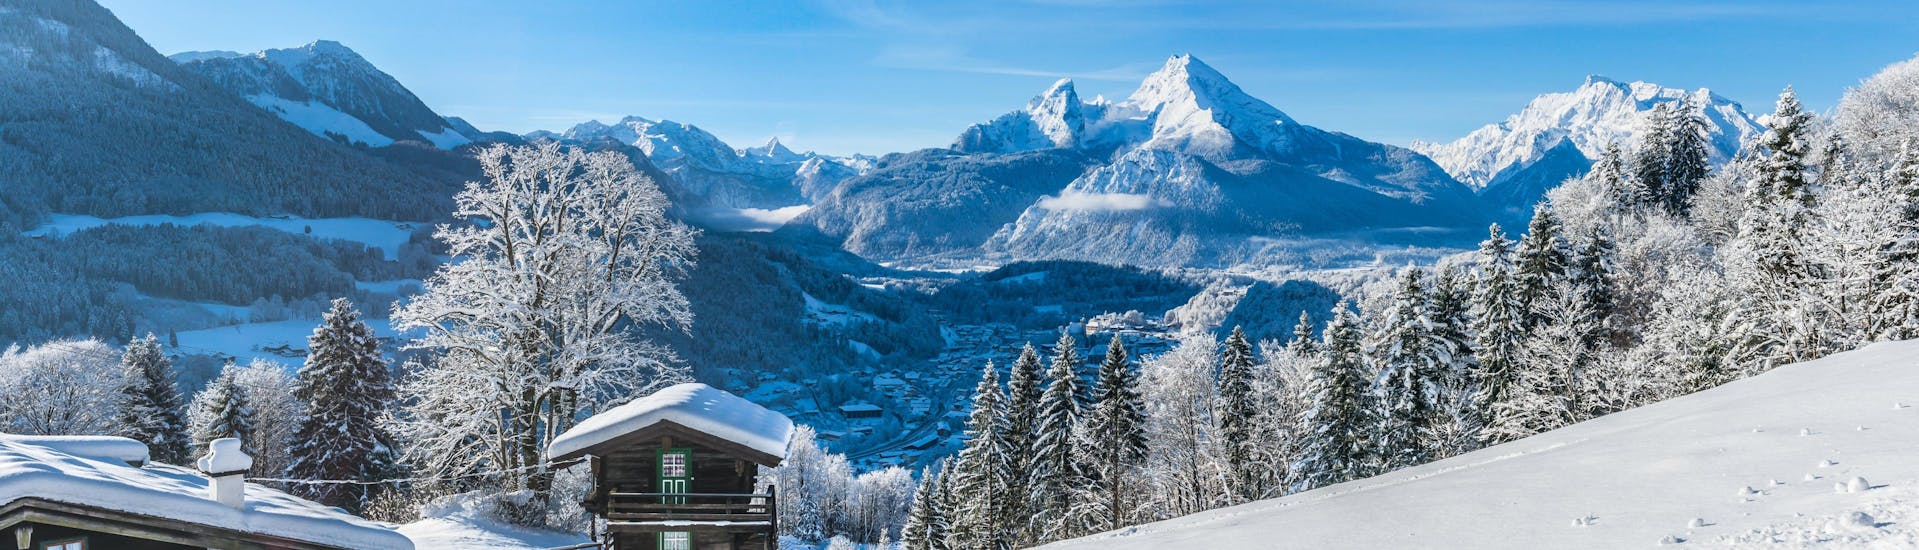 A view of the dreamly winter landscape of Berchtesgadener Land, a popular region in Germany where visitors can books ski lessons with one of the local ski schools.